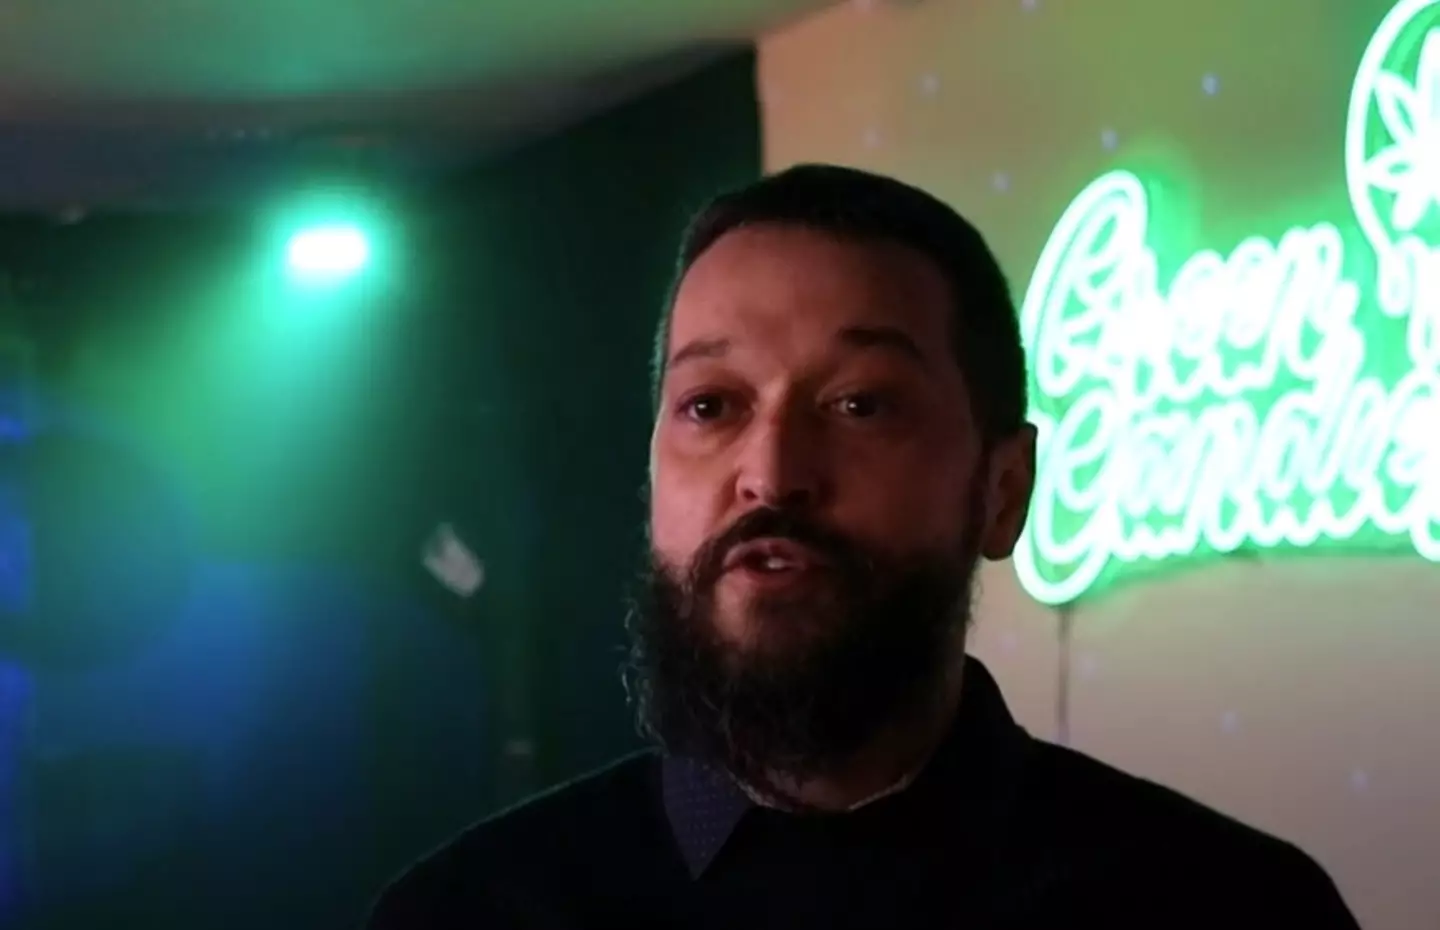 Michael Fisher runs the Teesside Cannabis Club and says it's the best way to help people.